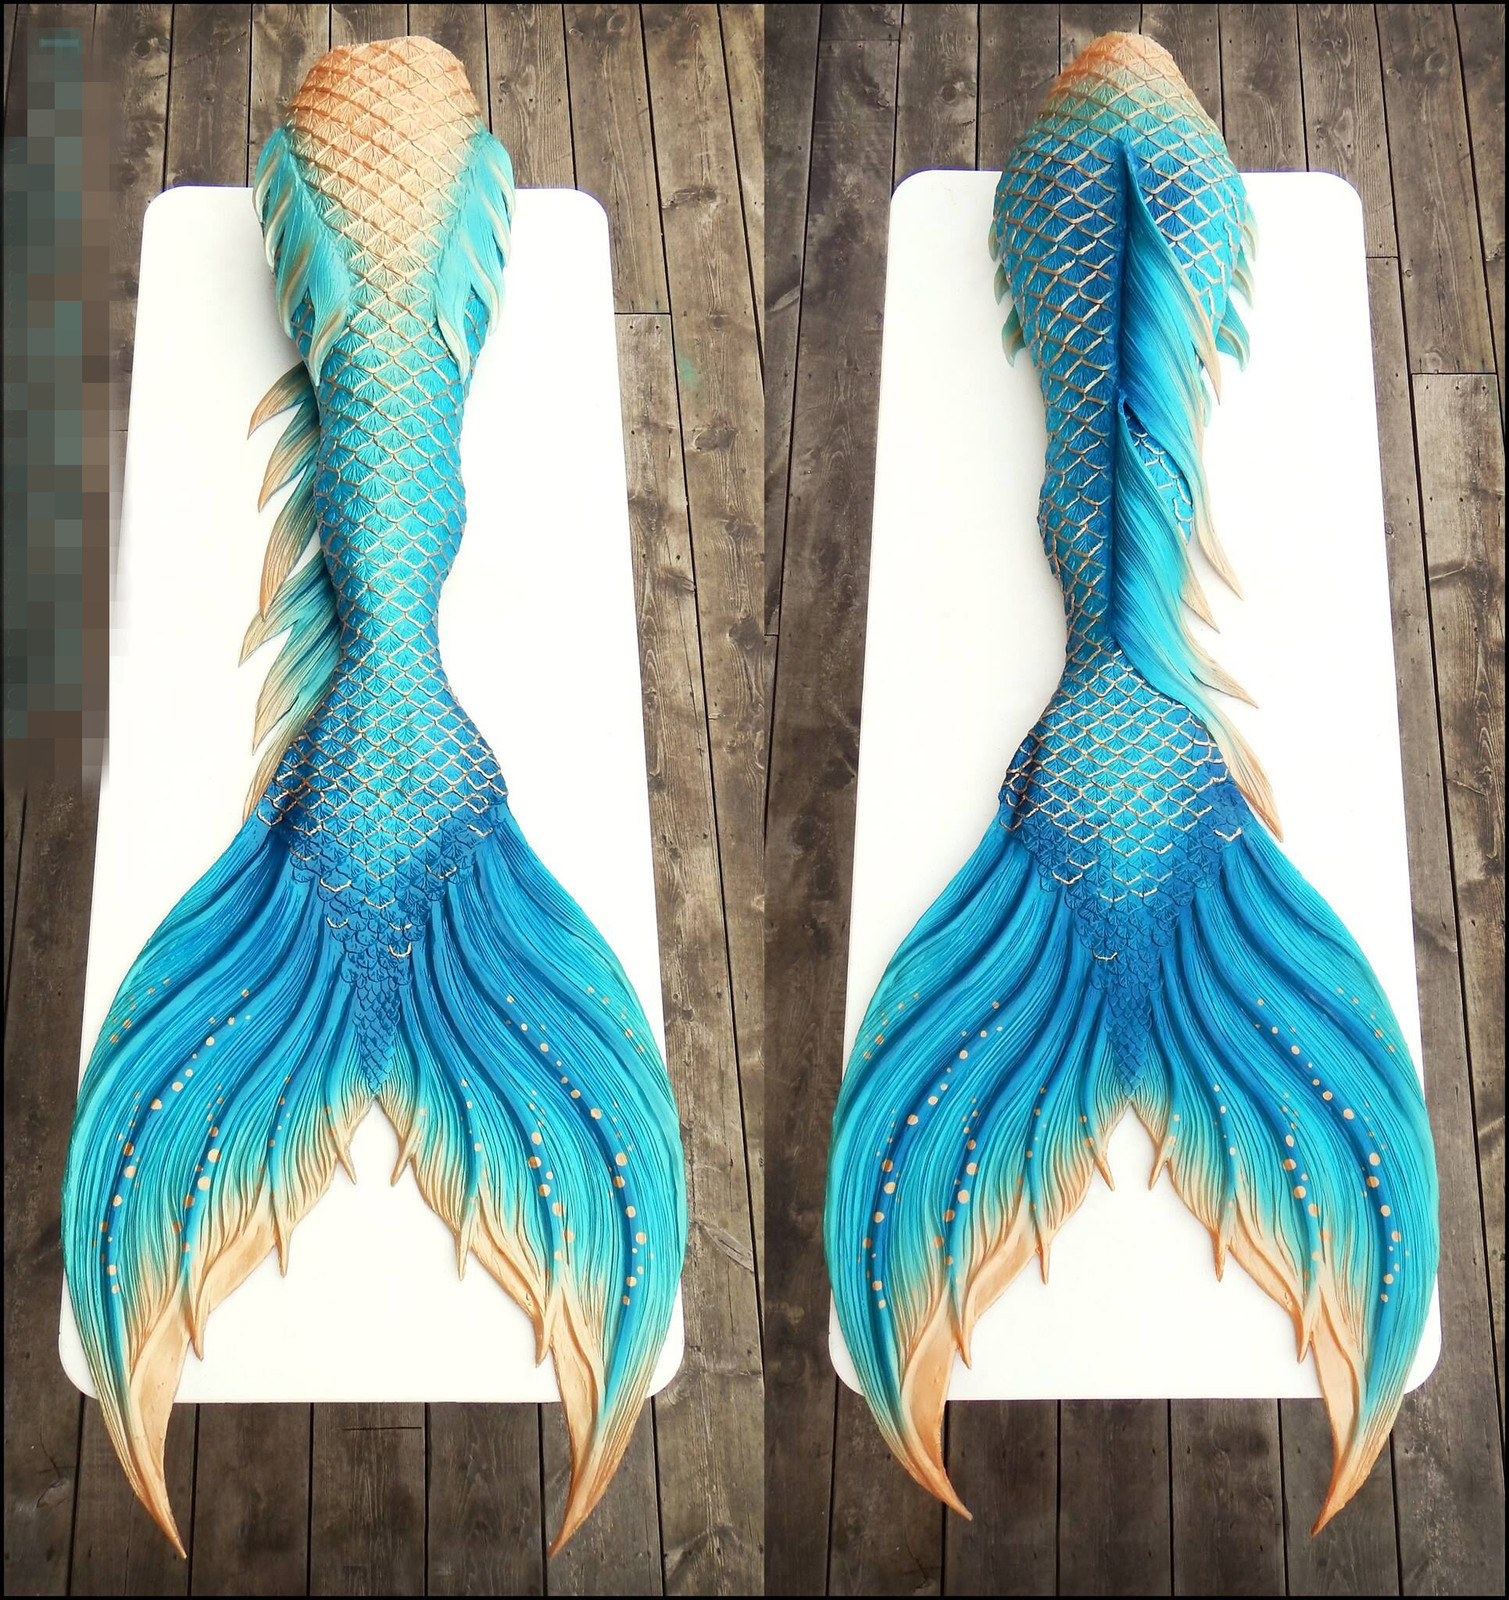 2018 Best Swimmable Mermaid Tails With Fins Monofin Kids Adult Cool